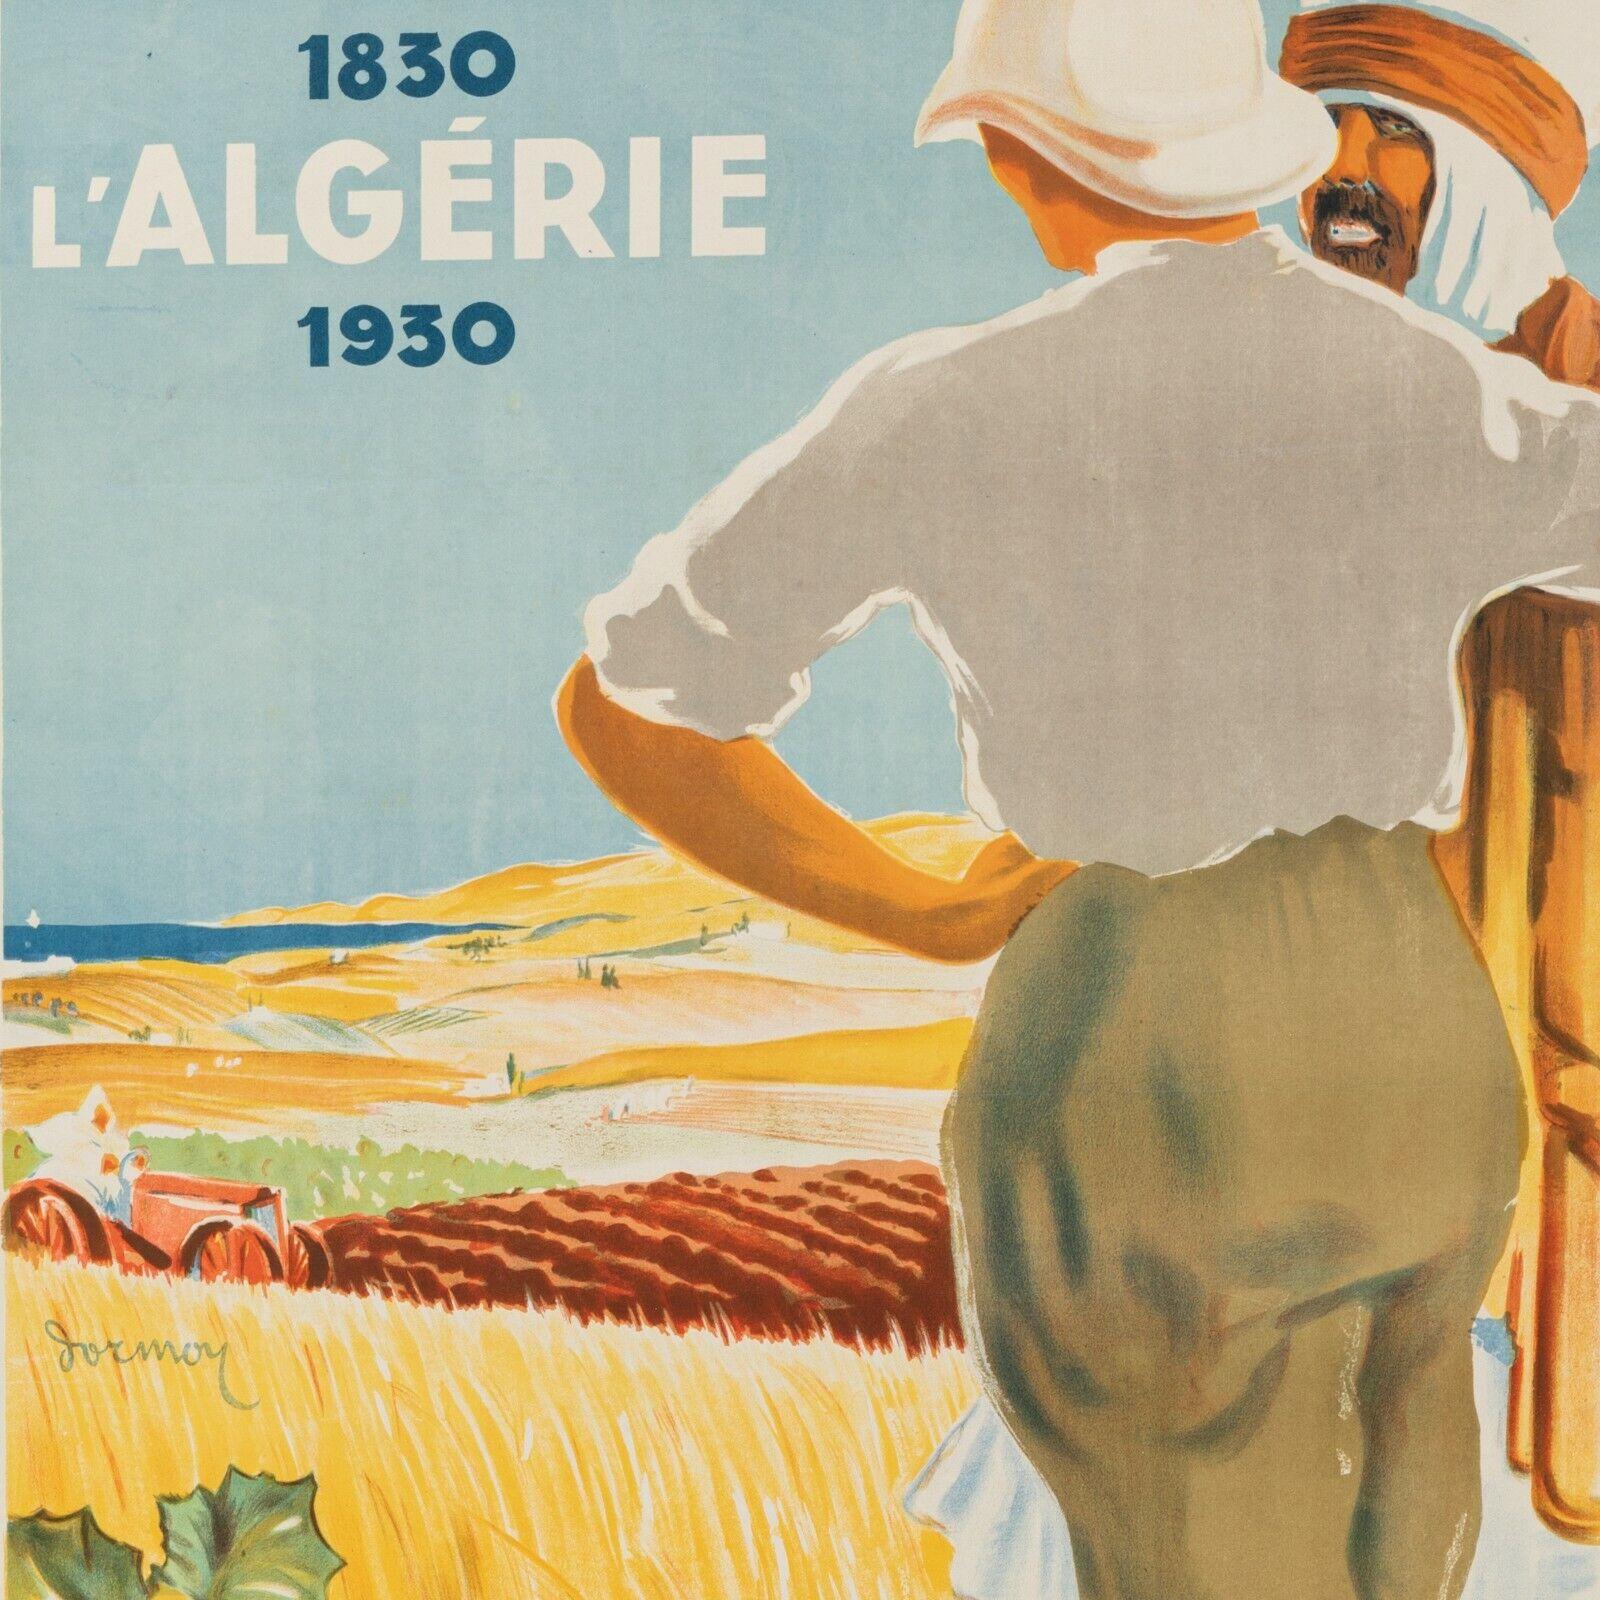 Original Colonial Poster-Dormoy-Algeria 1830 1930-Farmland, 1930

Original poster celebrating the centenary of the colonization of Algeria between 1830 and 1930. We see a Settler and a local in front of Algerian agricultural land.

Additional